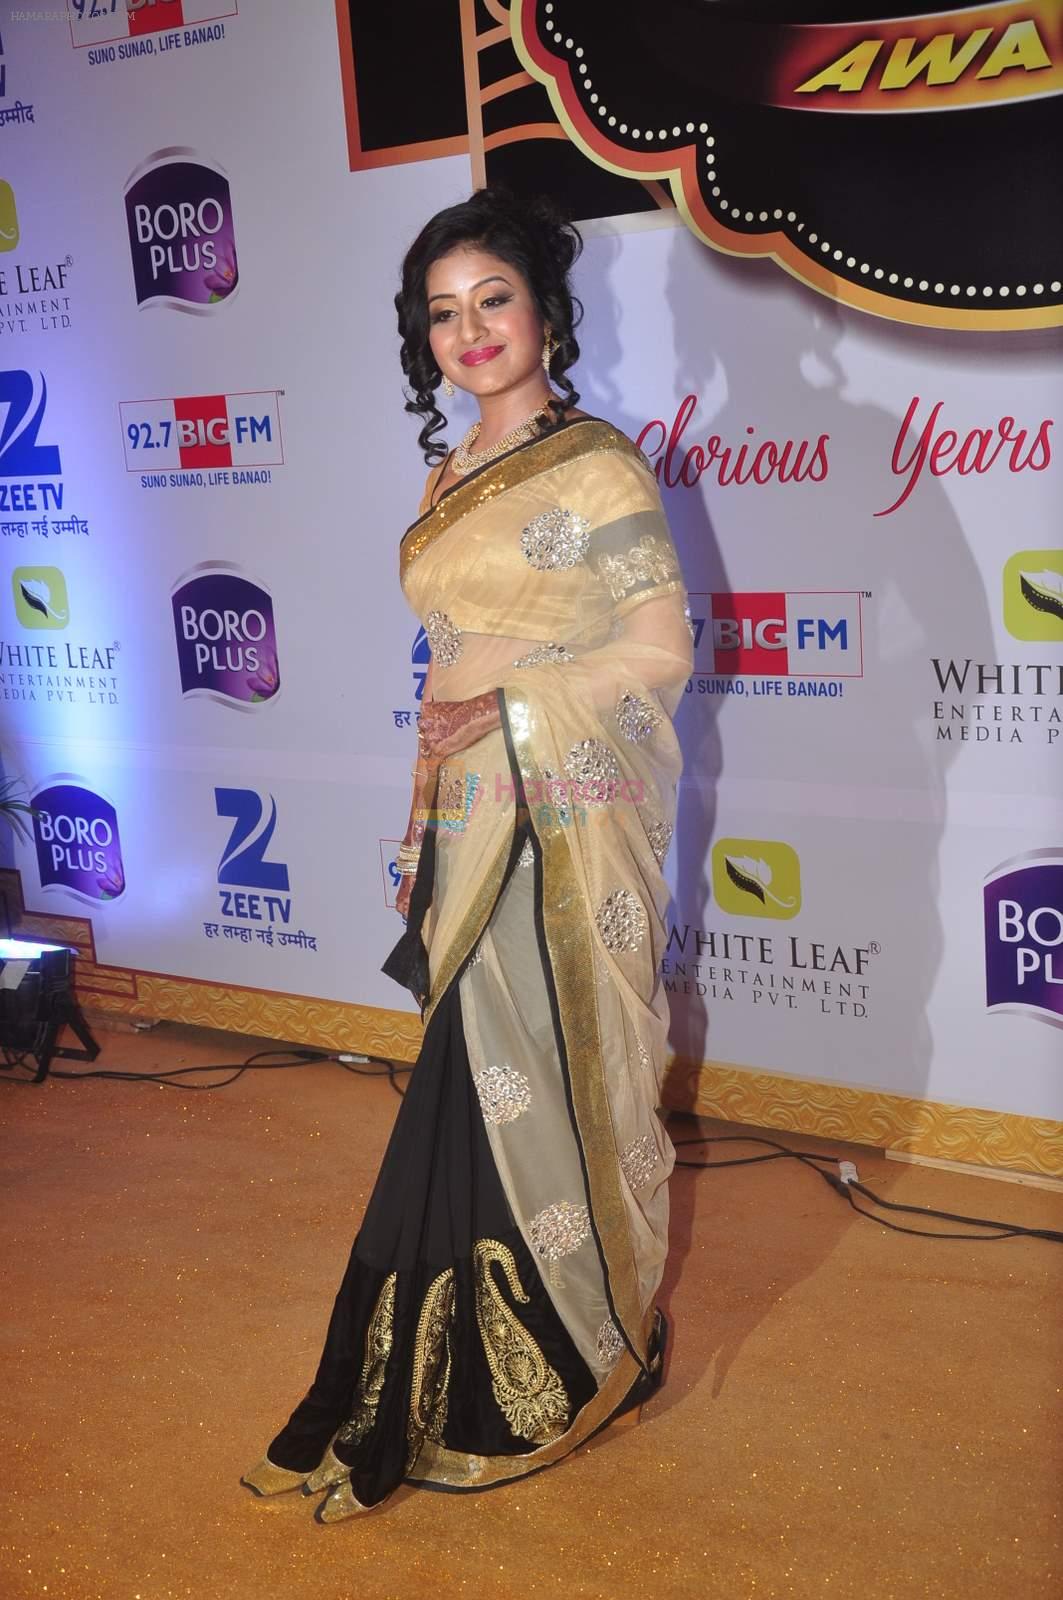 at Gold Awards in Filmistan on 4th June 2015